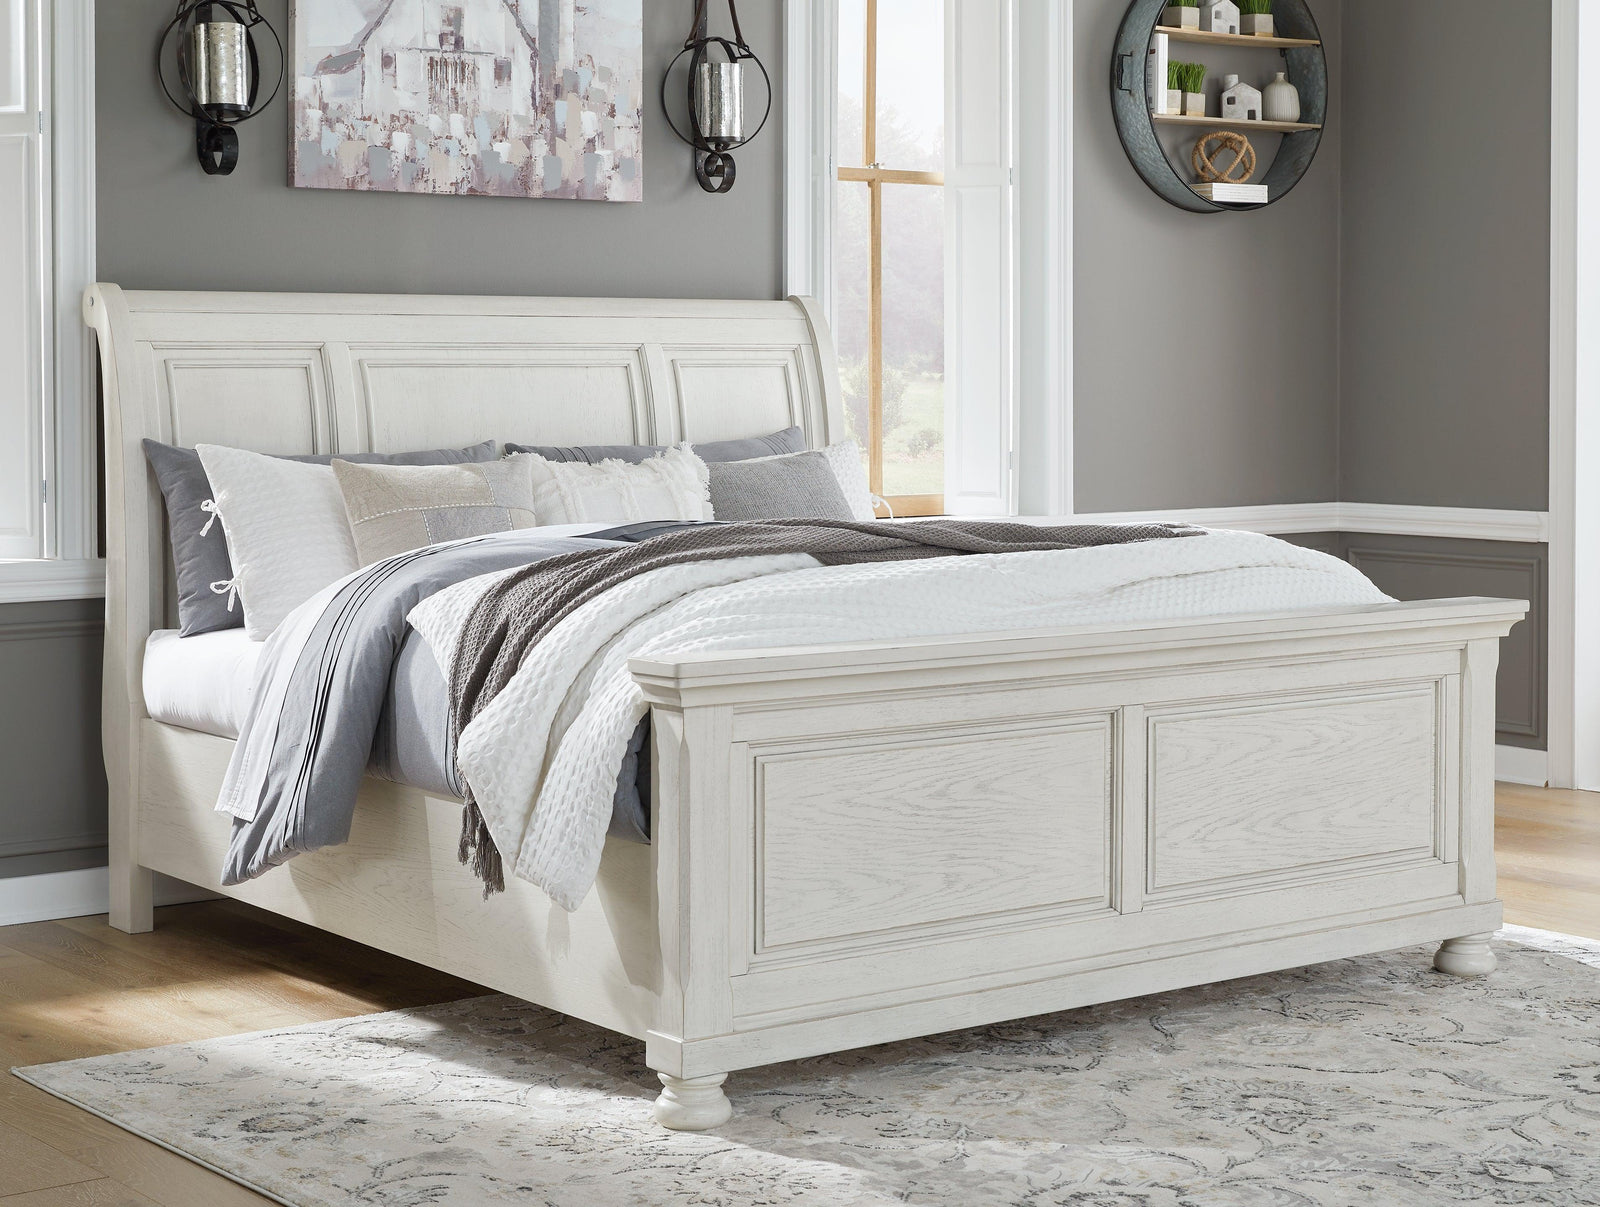 Robbinsdale Antique White King Sleigh Bed